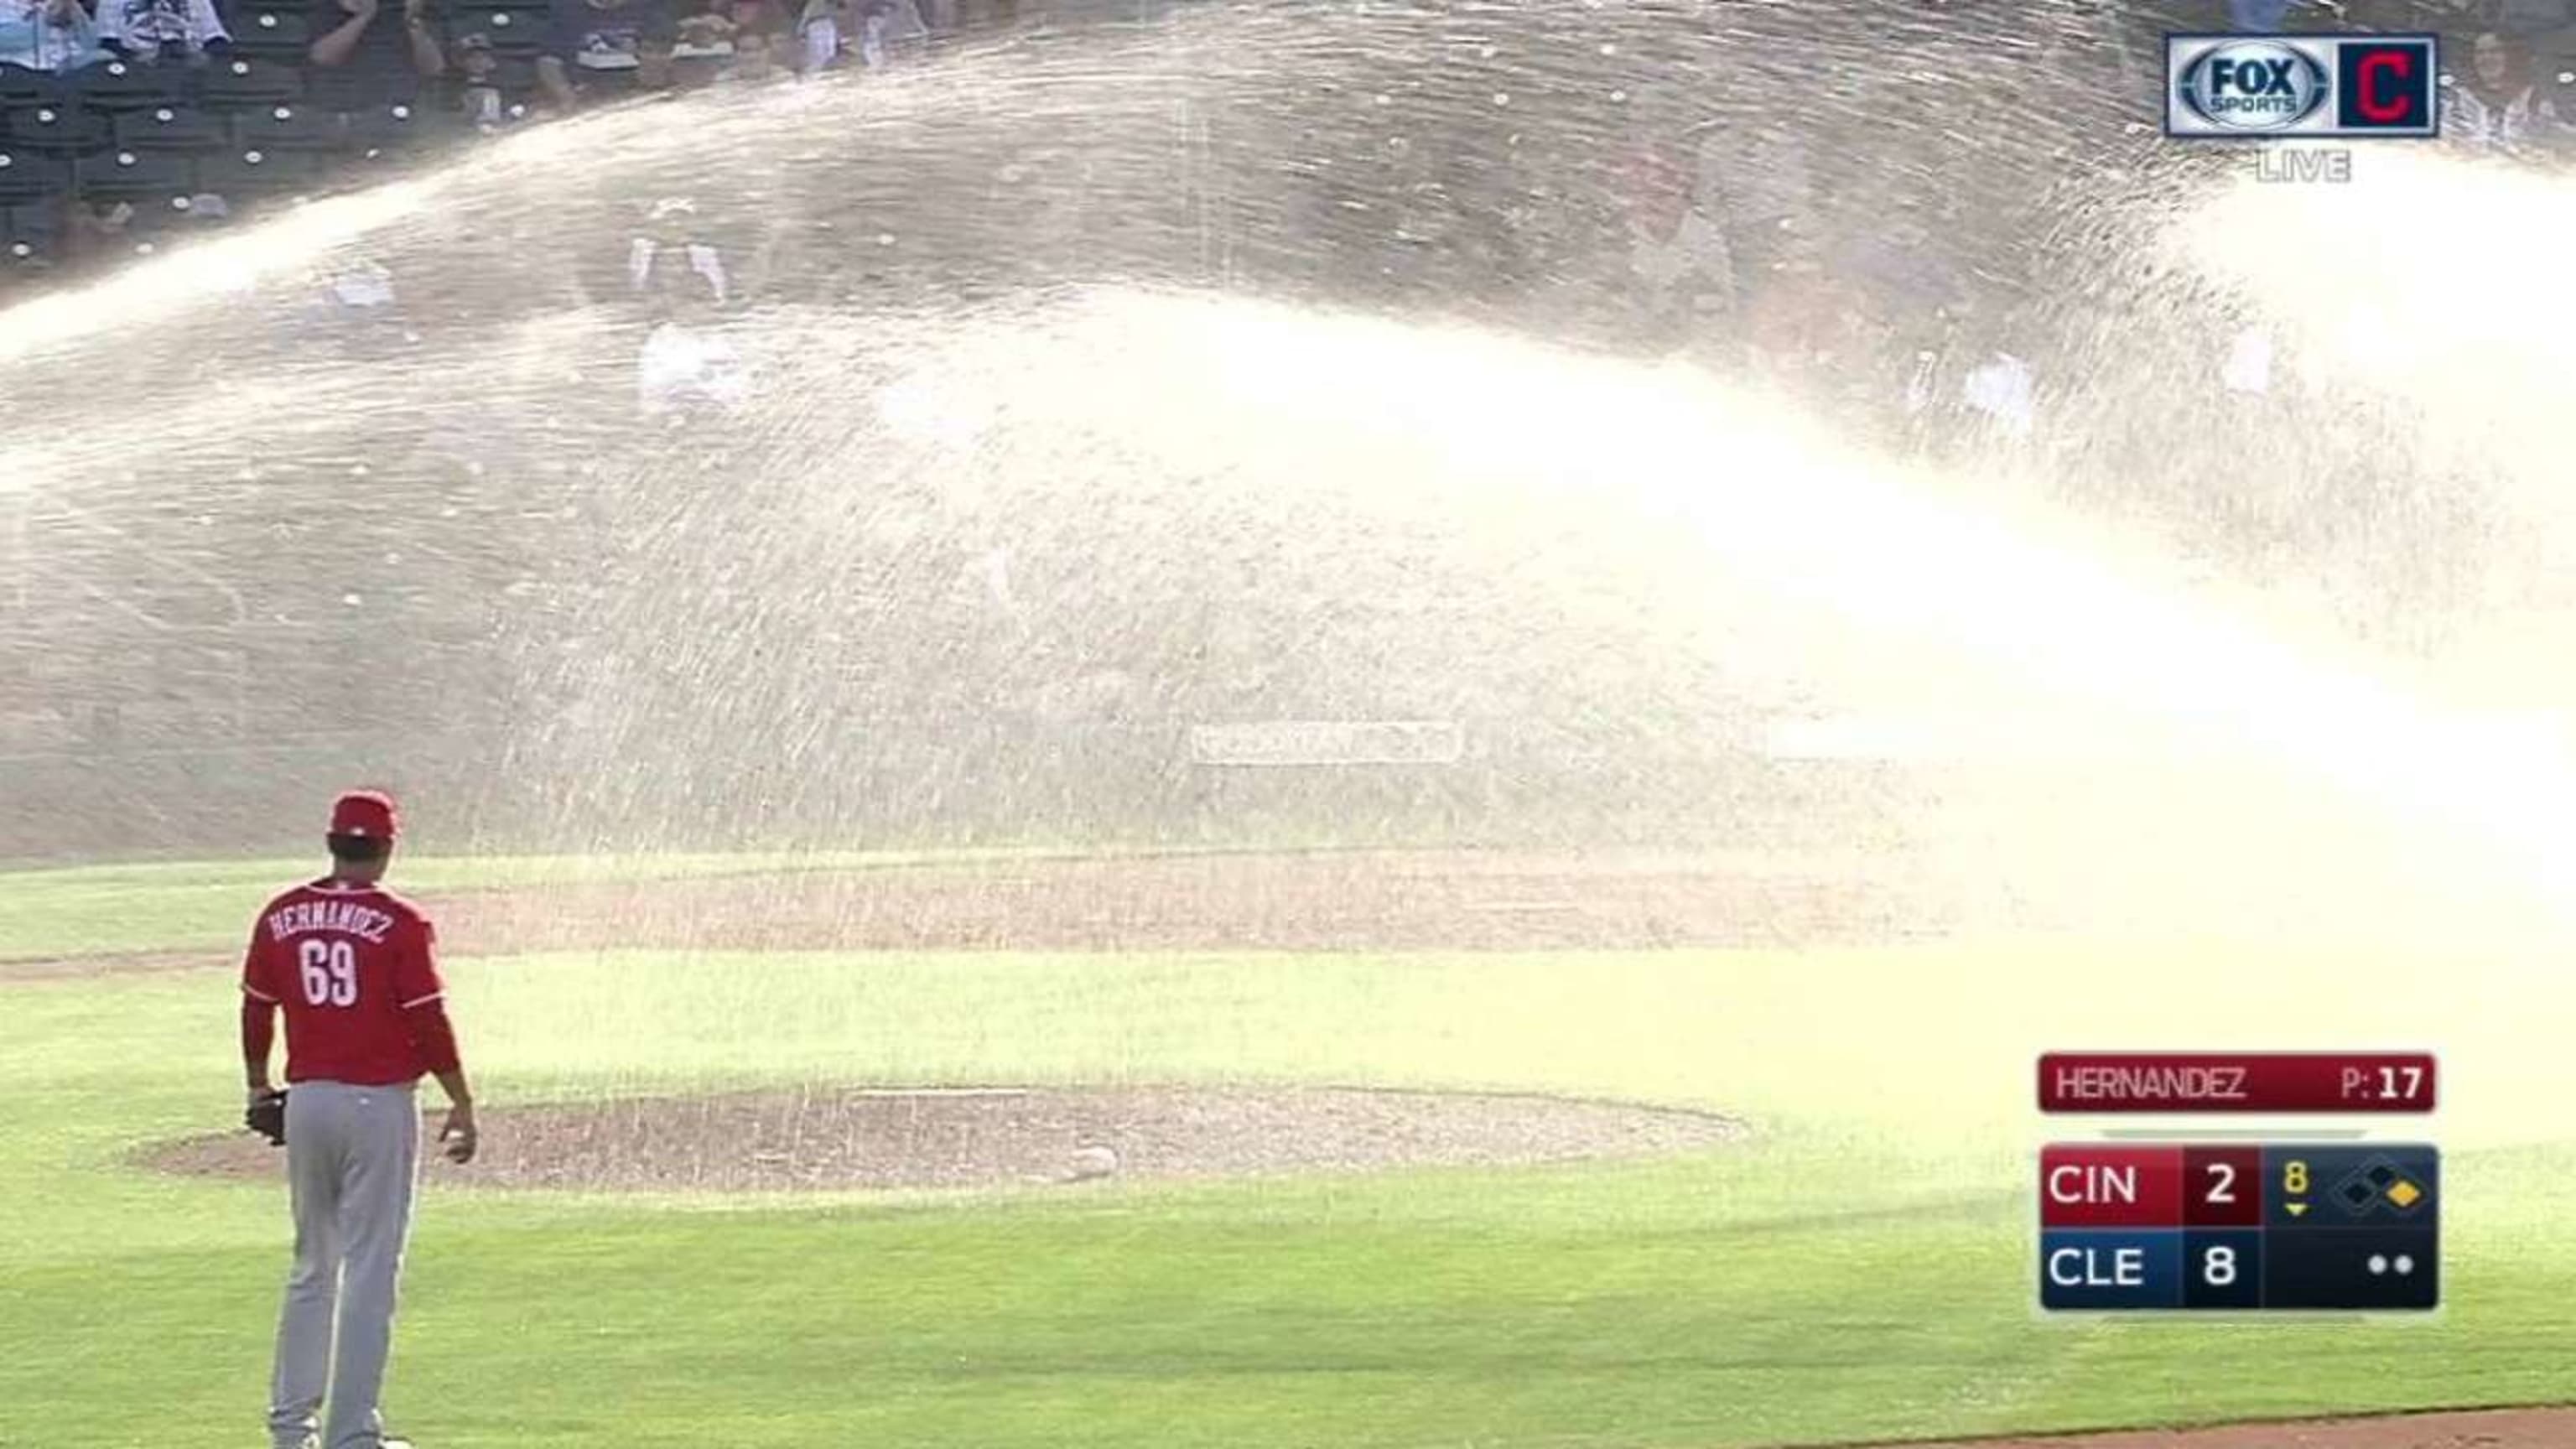 Todays Reds-Indians game was briefly interrupted by an impromptu sprinkler show MLB